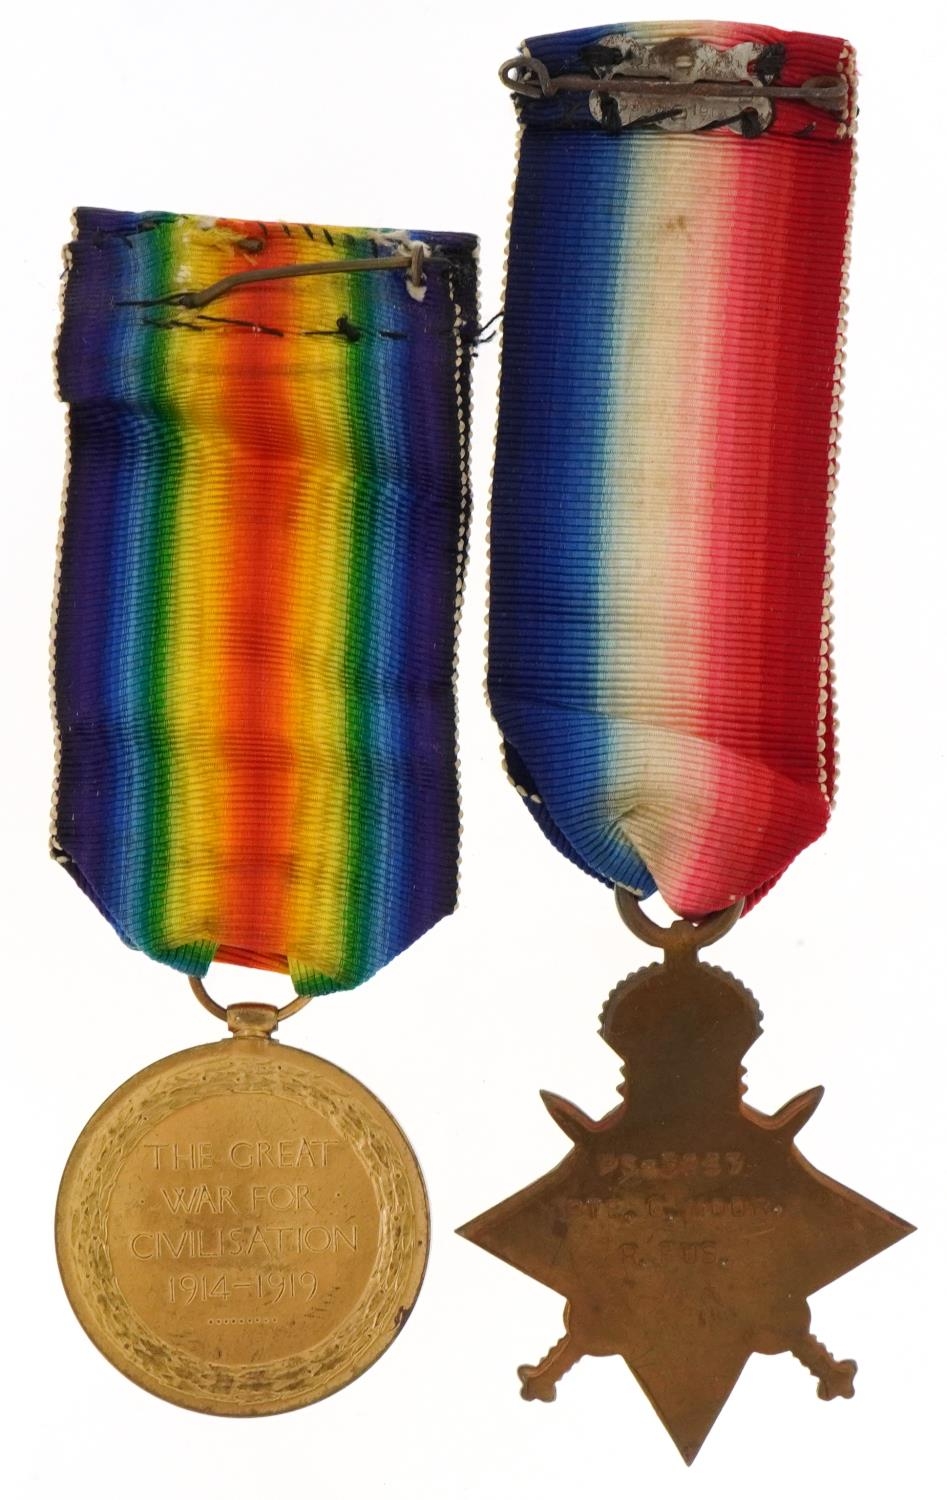 British military World War I medals comprising Victory medal and 1914-1915 star awarded to PS-3857. - Image 3 of 4